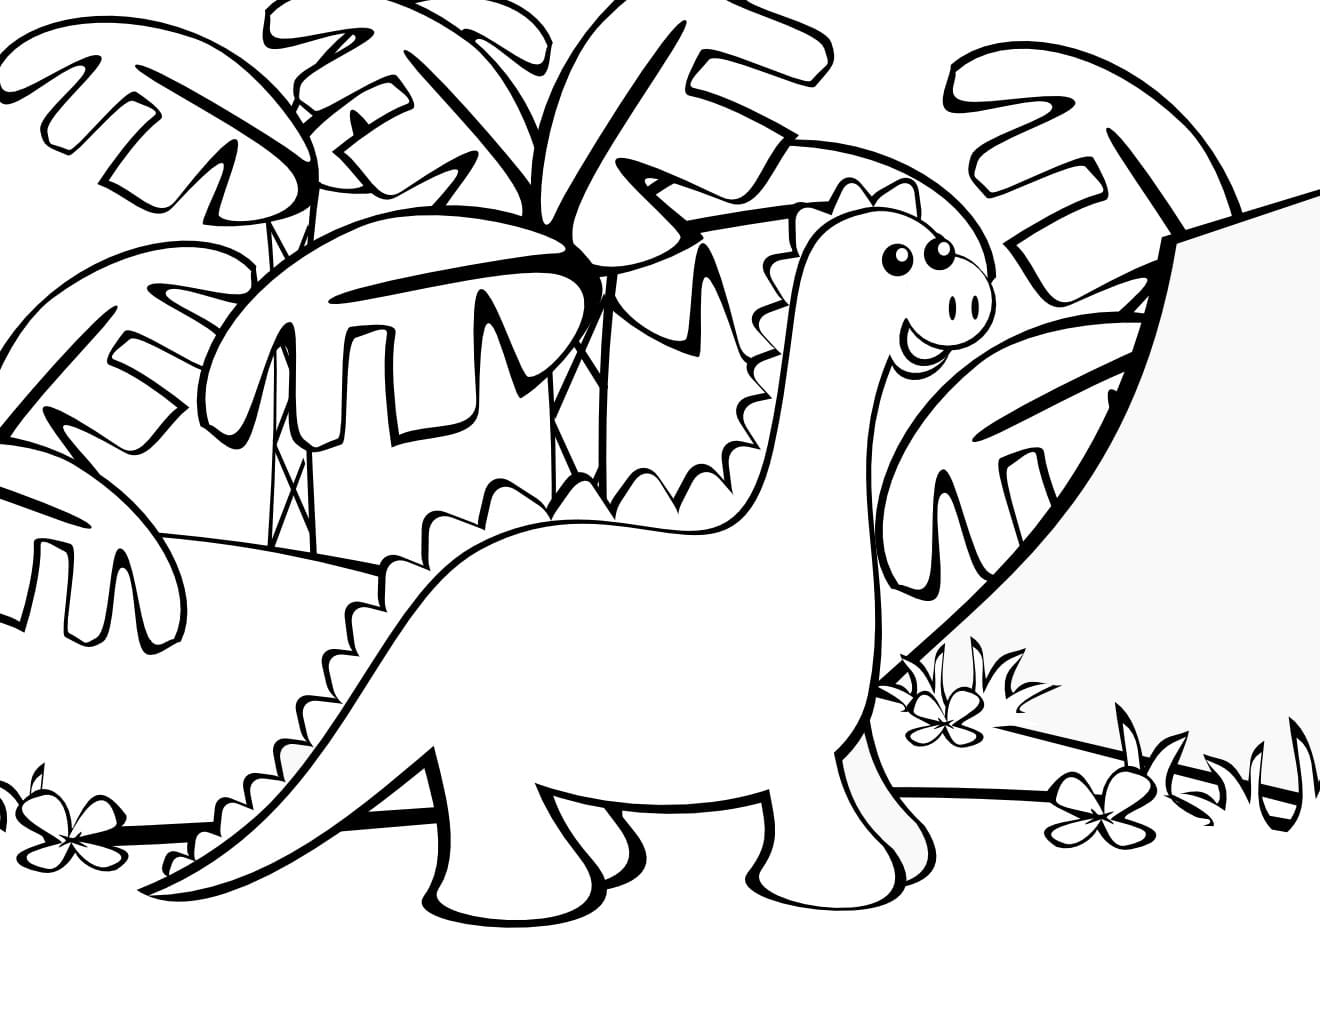 coloring-pages-dinosaurs-large-collection-print-for-free